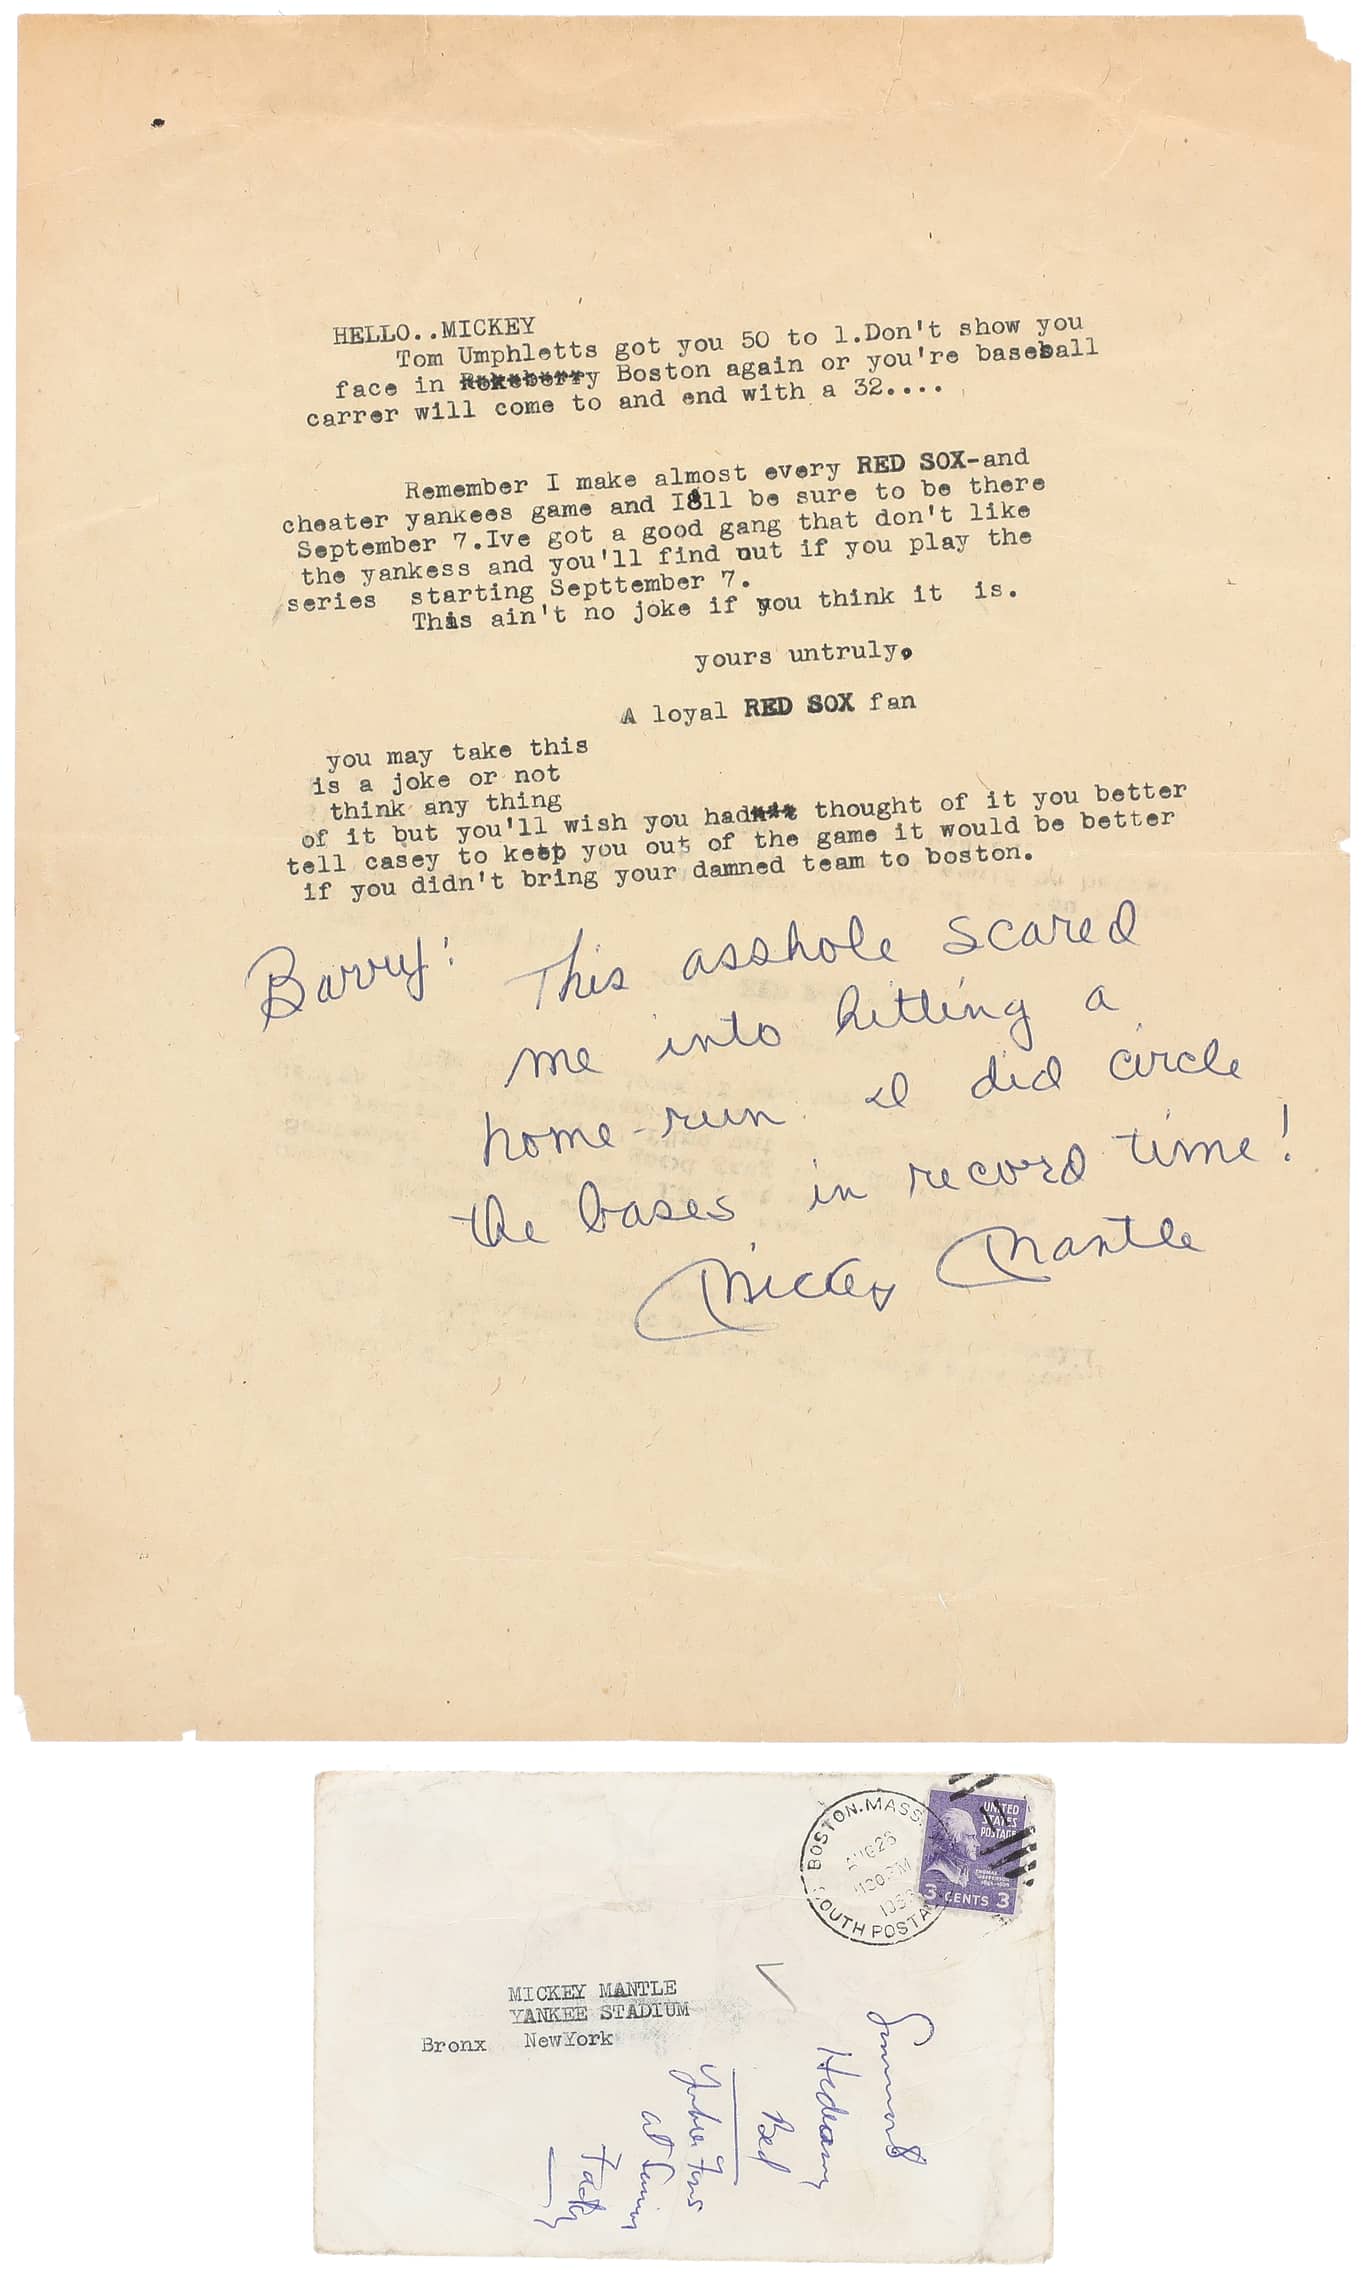 Death threat letter signed by Mickey Mantle